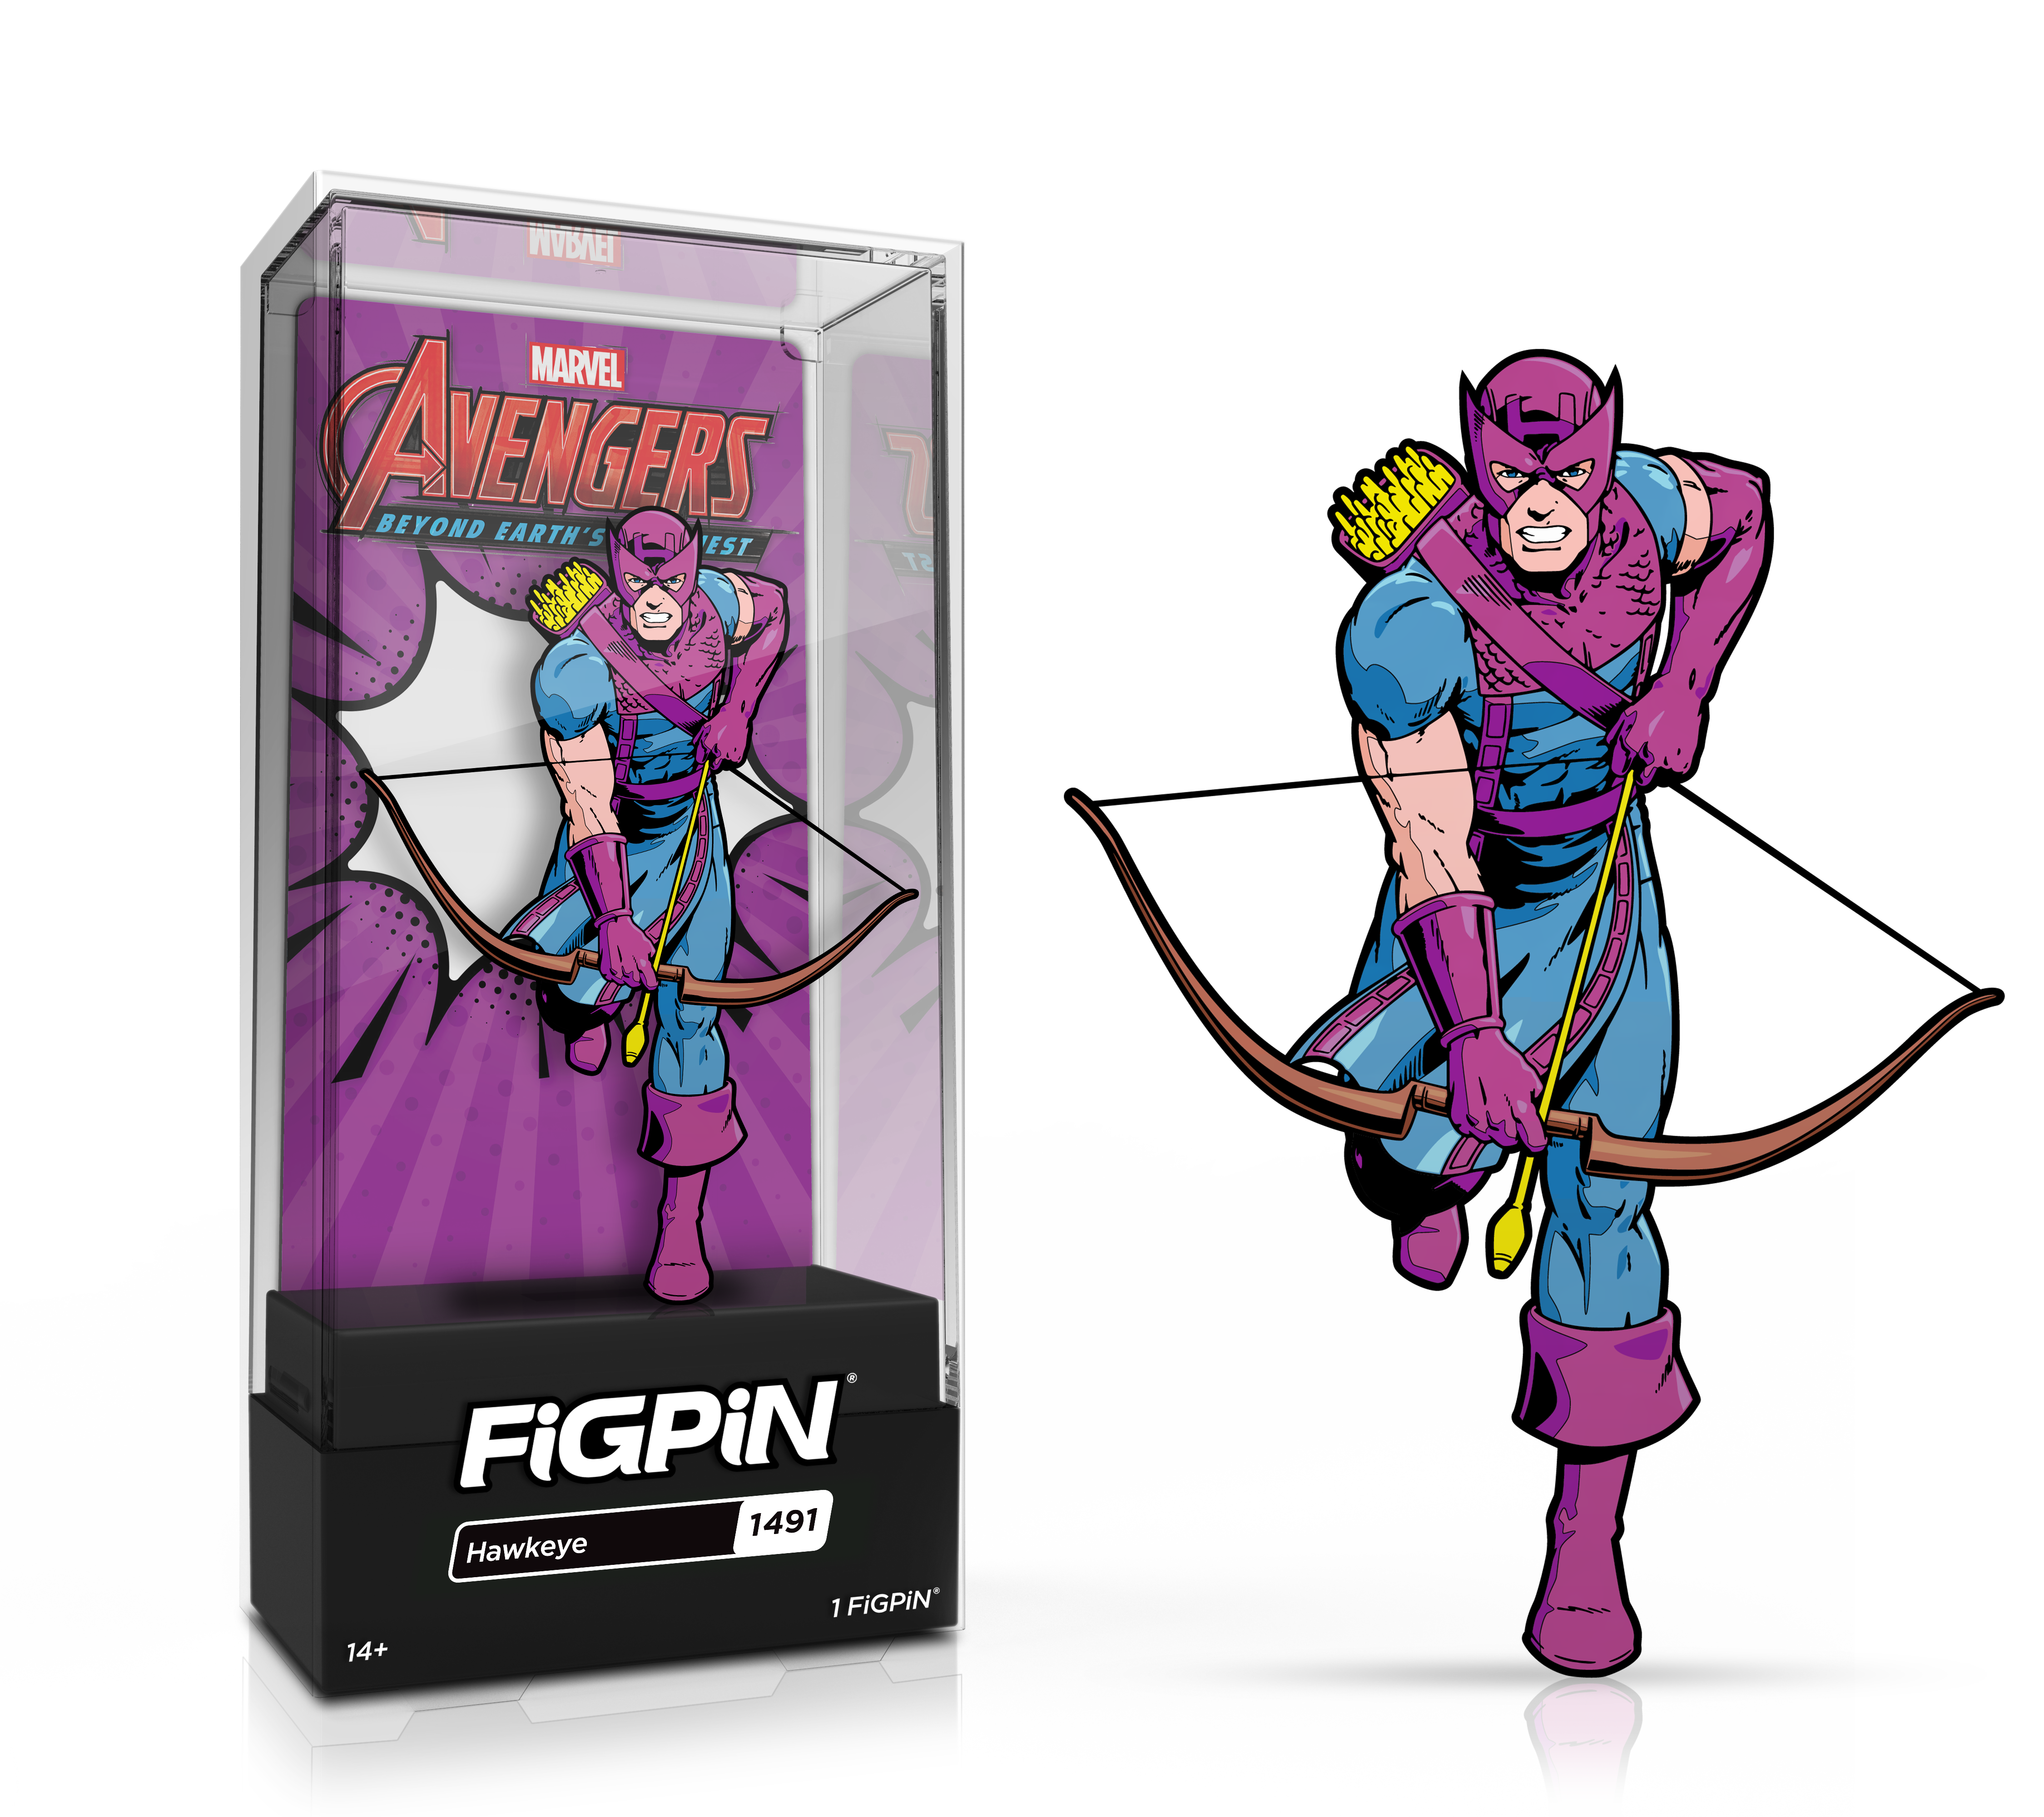 Side by side view of the Hawkeye enamel pin in display case and the art render.